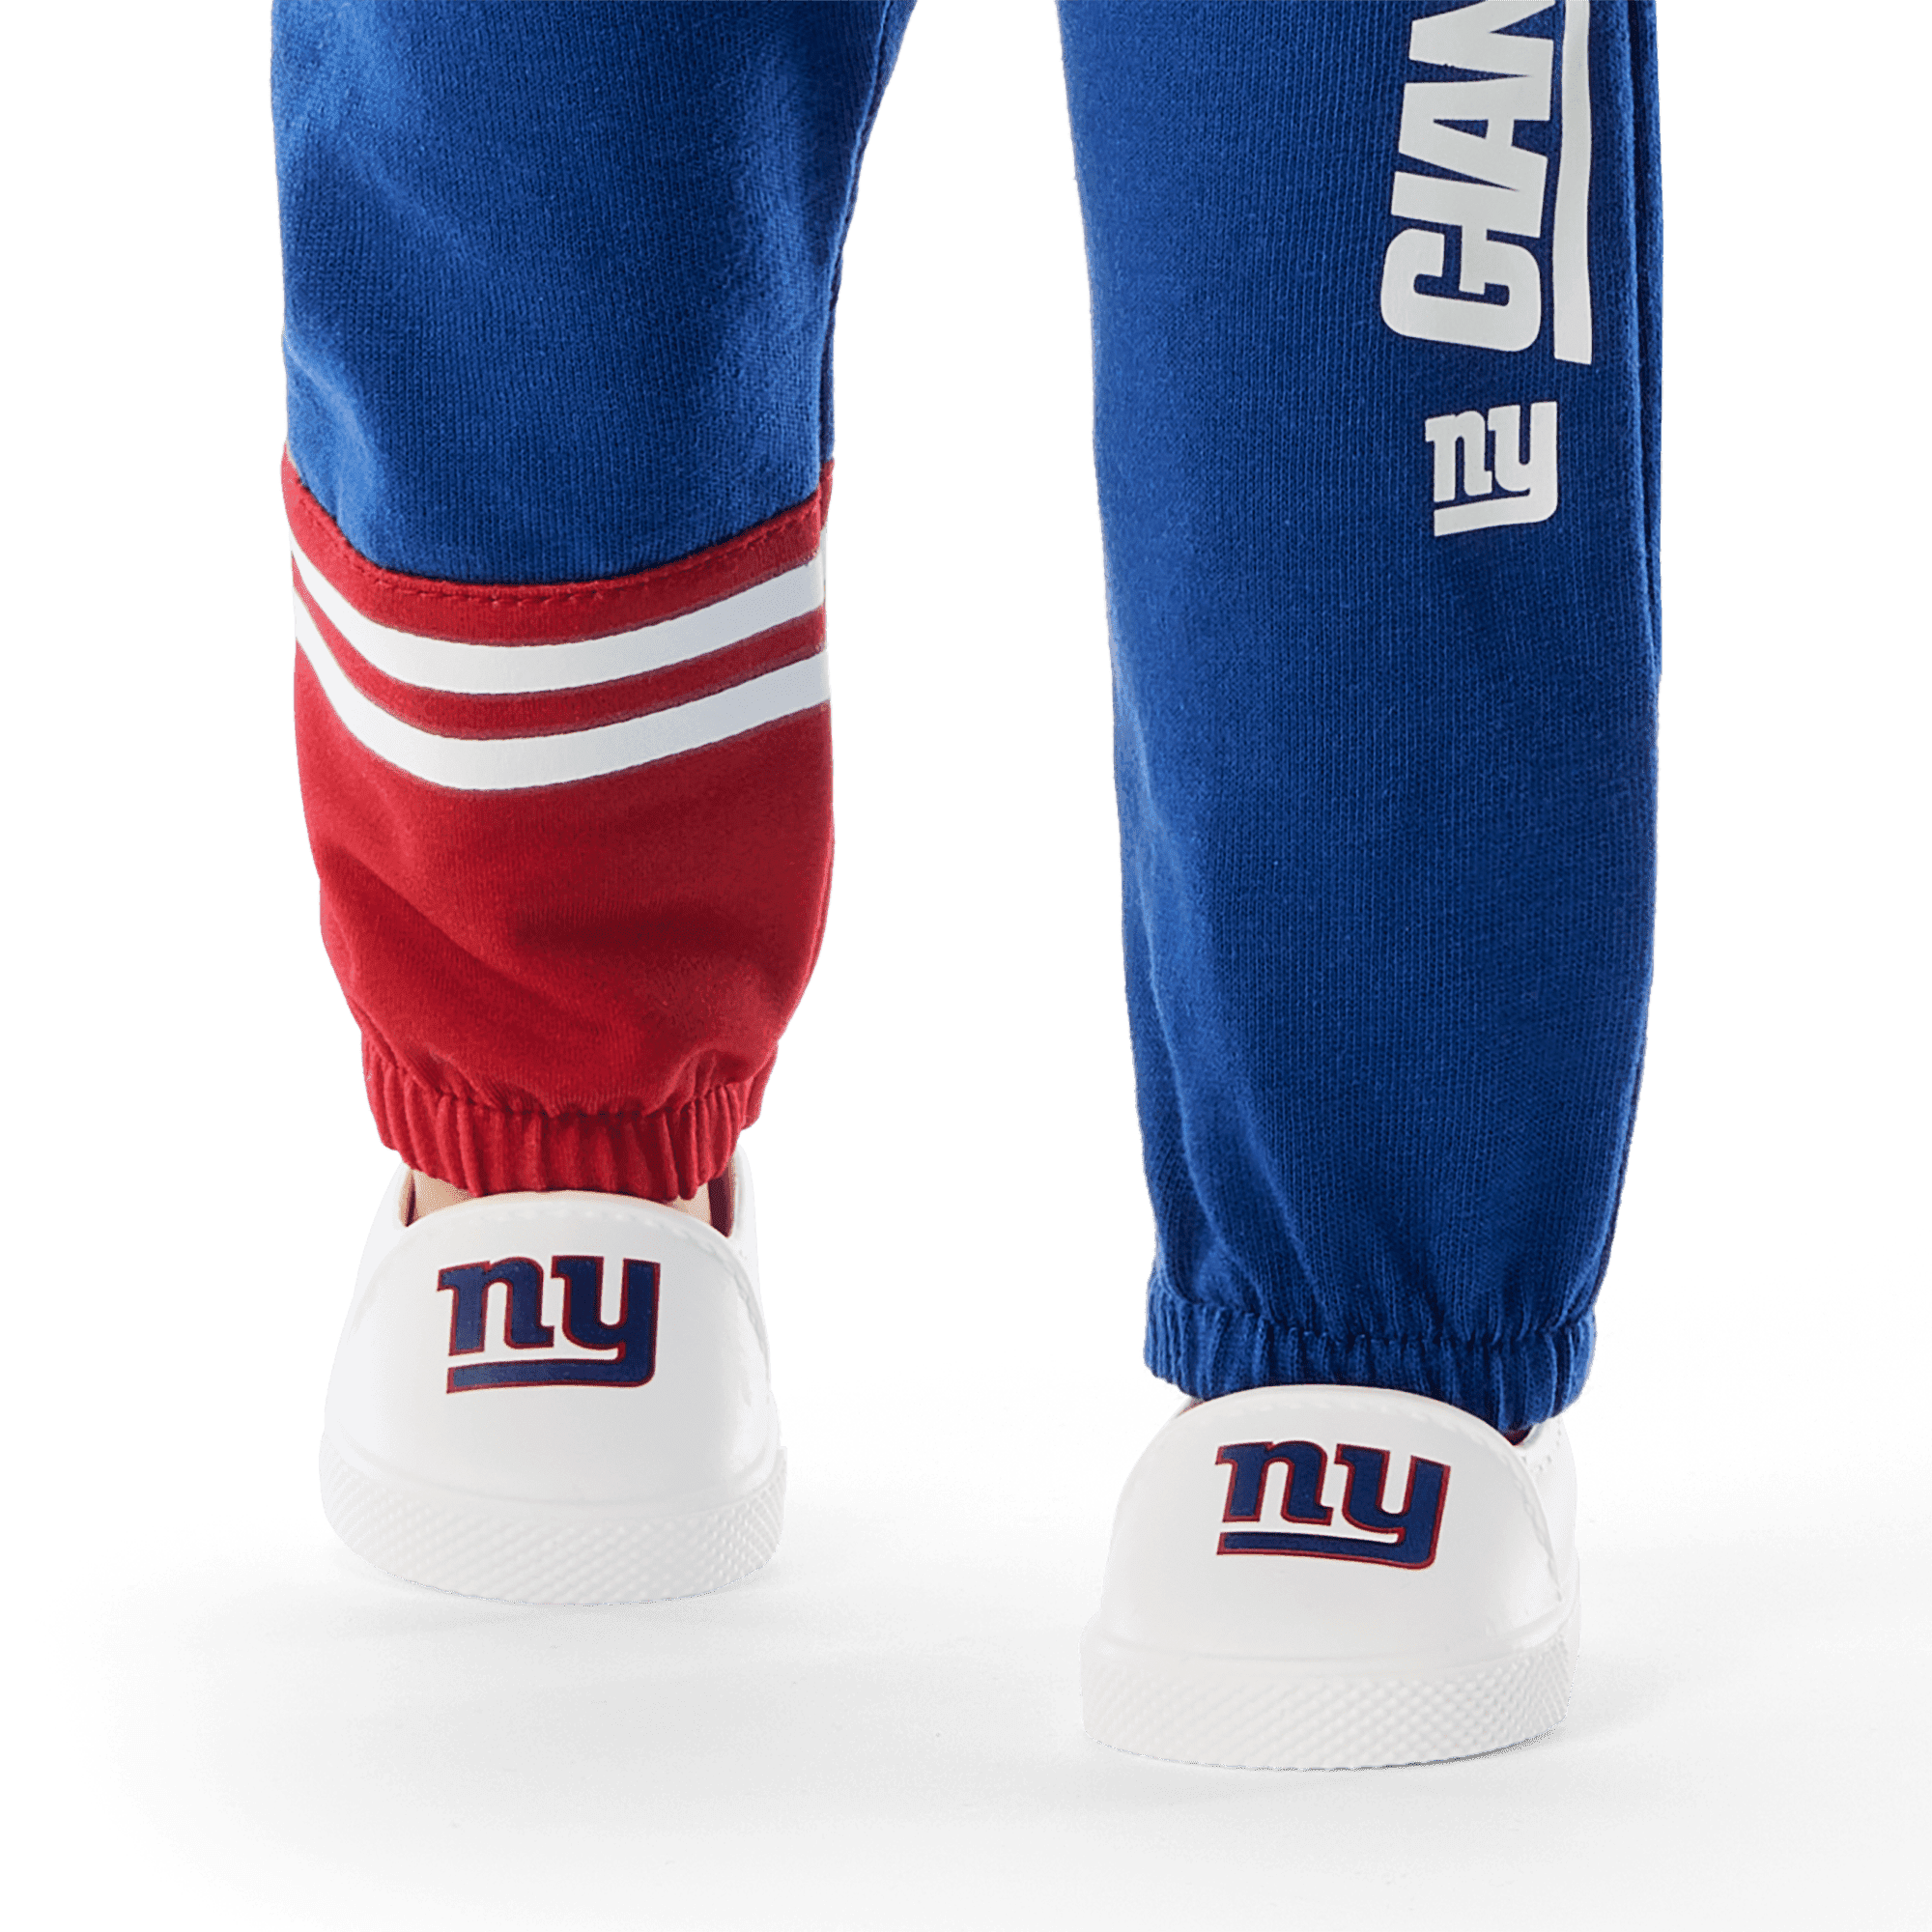 American Girl® x NFL New York Giants Fan Outfit & Accessories for 18-inch Dolls